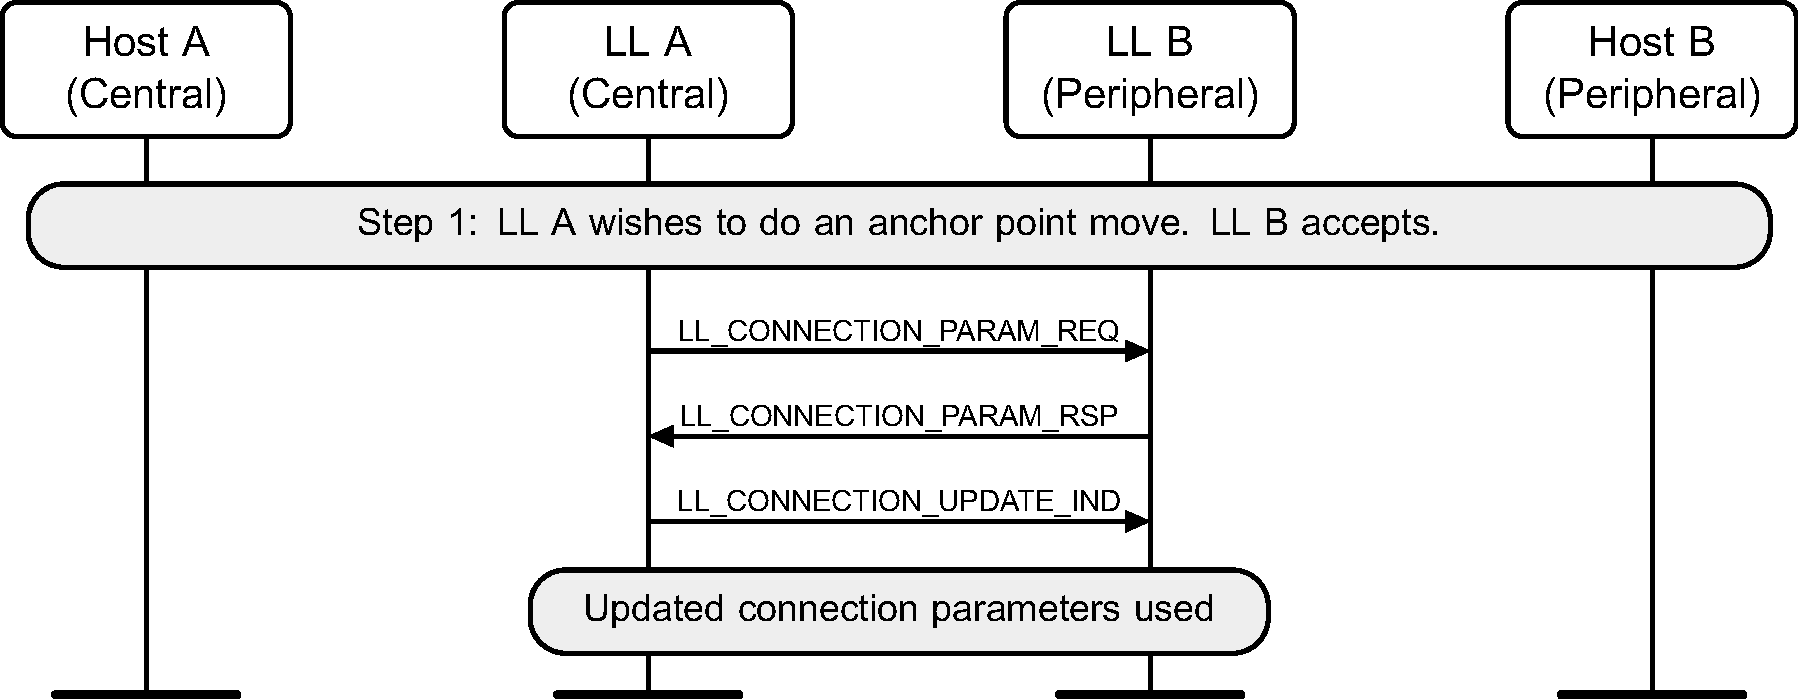 Central-initiated Connection Parameters Request procedure – Central requests a change in anchor points, Peripheral accepts